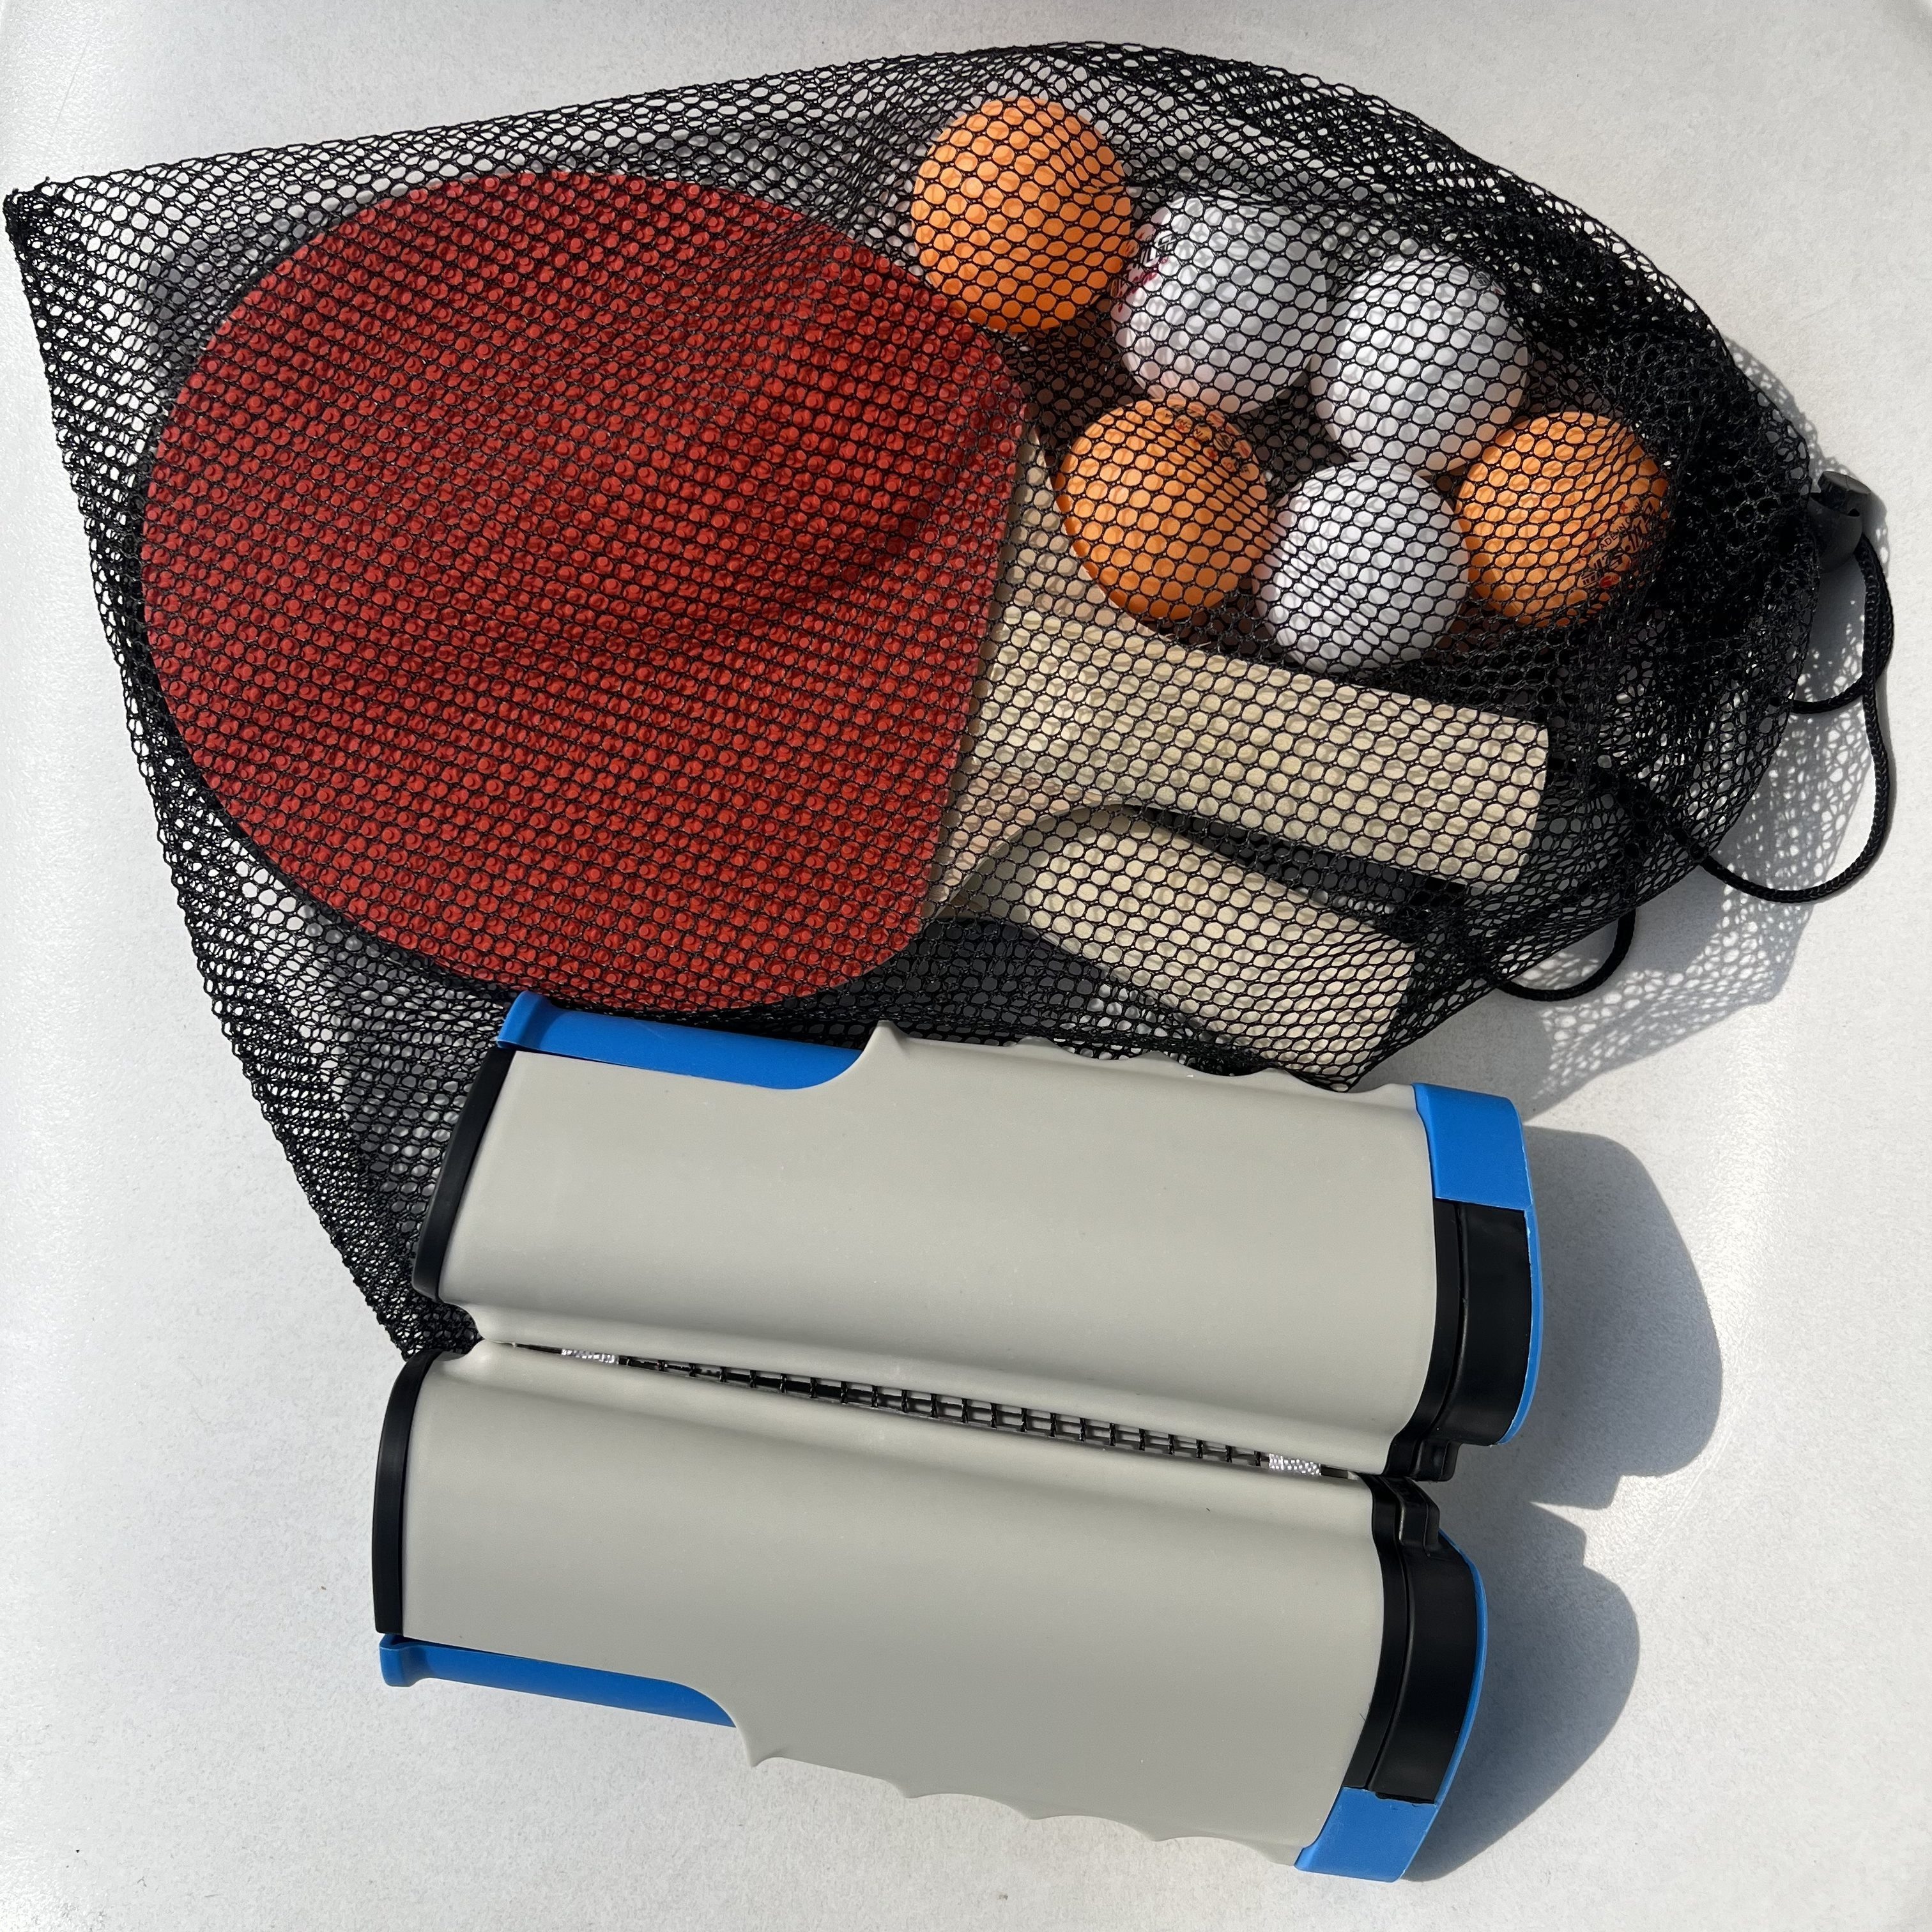 PRO-SPIN All-in-One Portable Ping Pong Set with Retractable Net,  High-Performance Ping Pong Paddles, 2-Player Set, Indoor & Outdoor Game